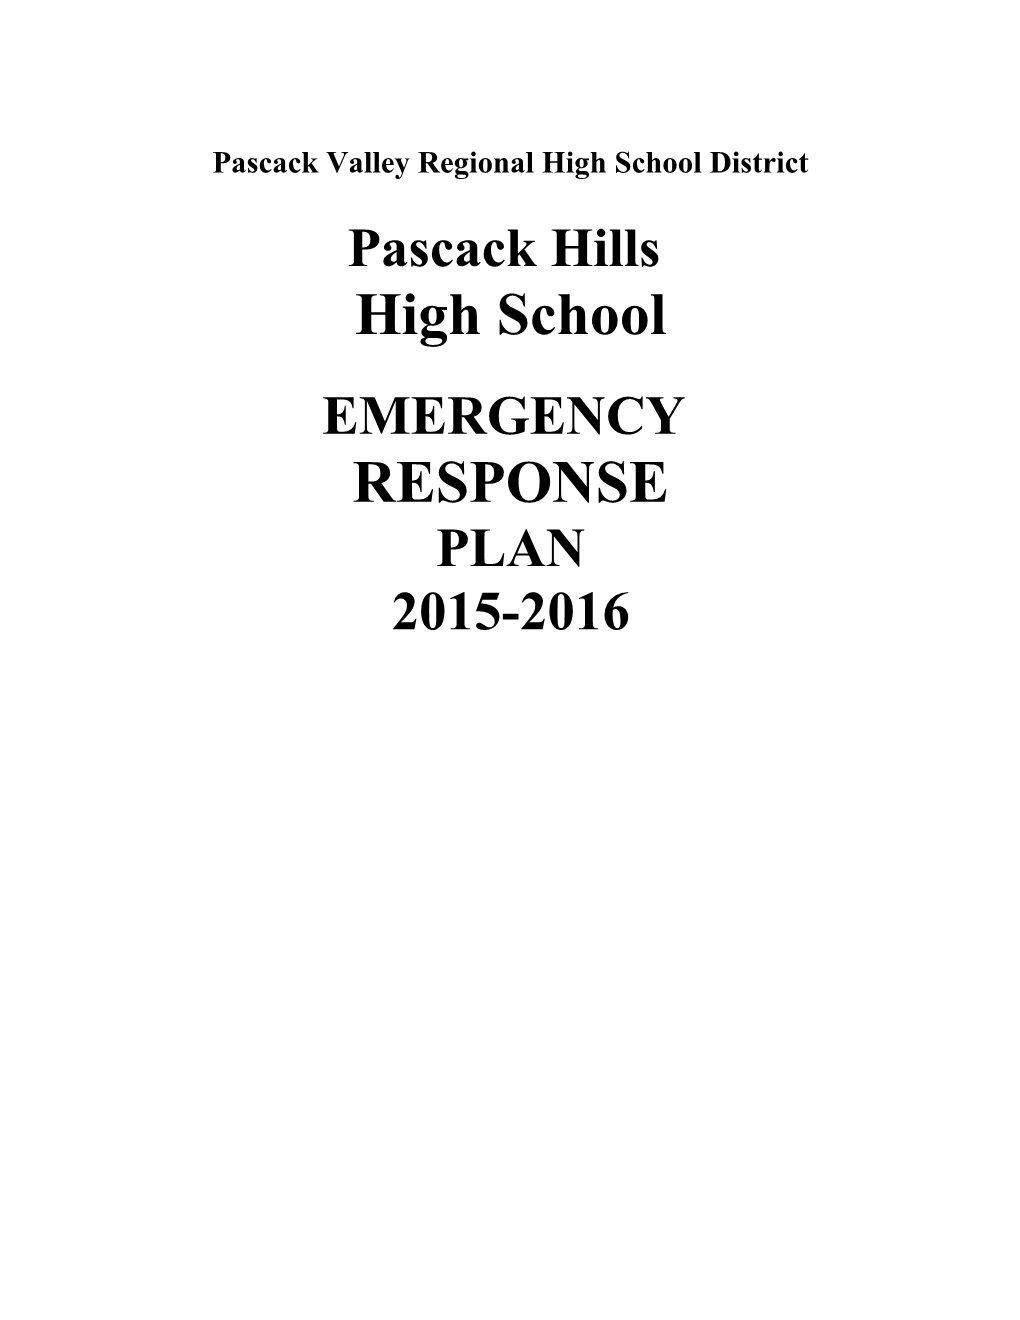 Pascack Valley Regional High School District